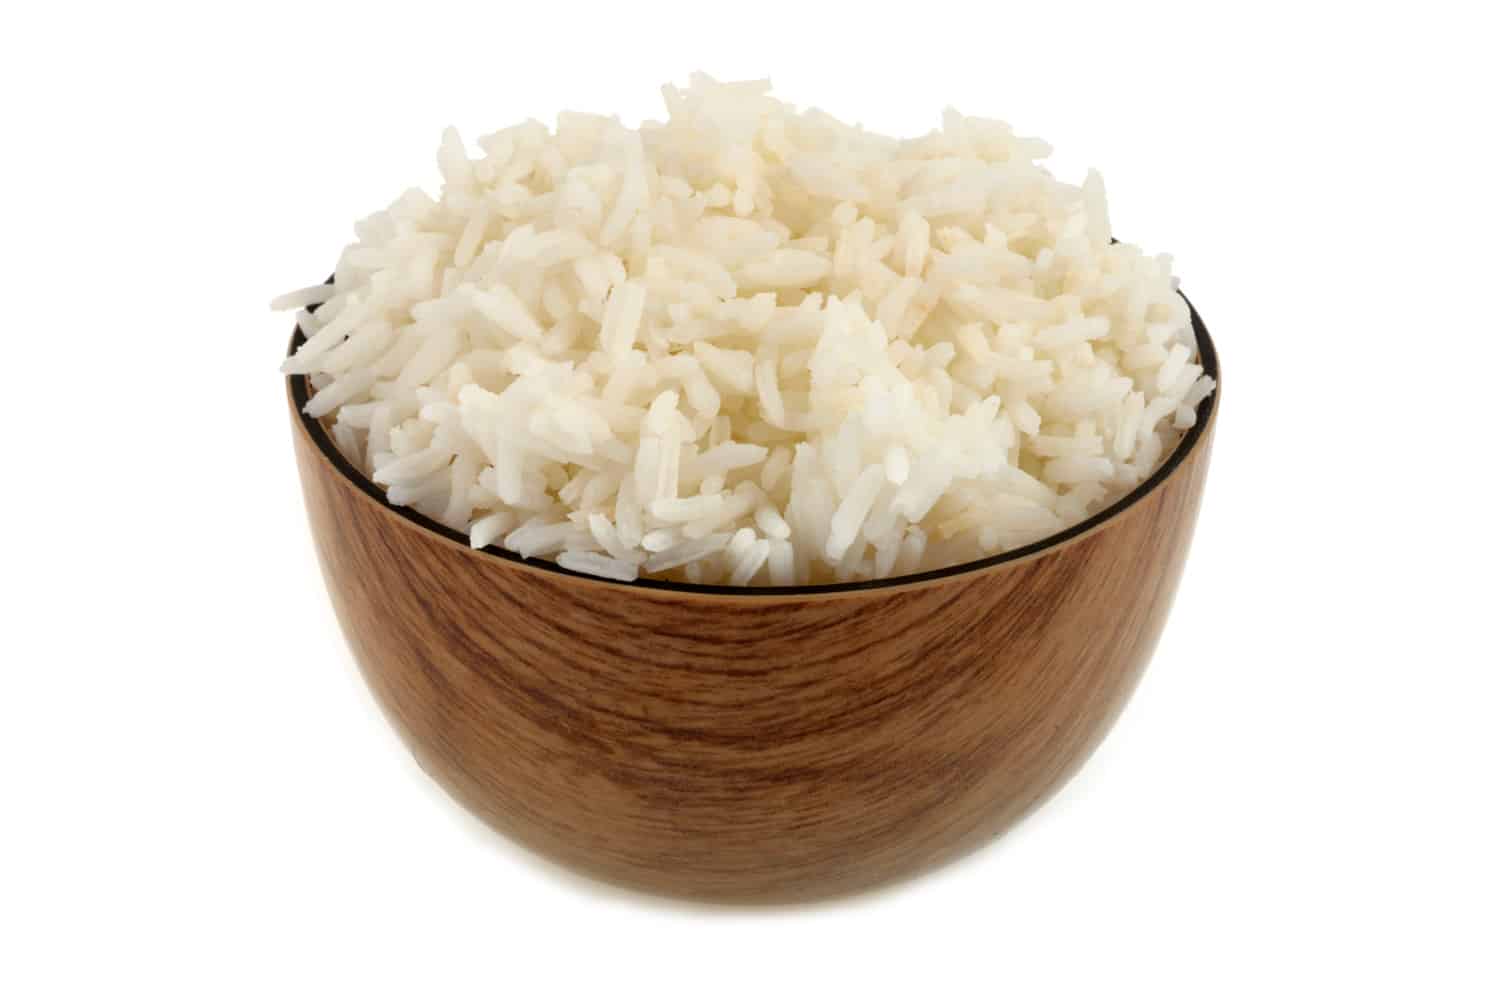 White rice bowl in close-up on a white background